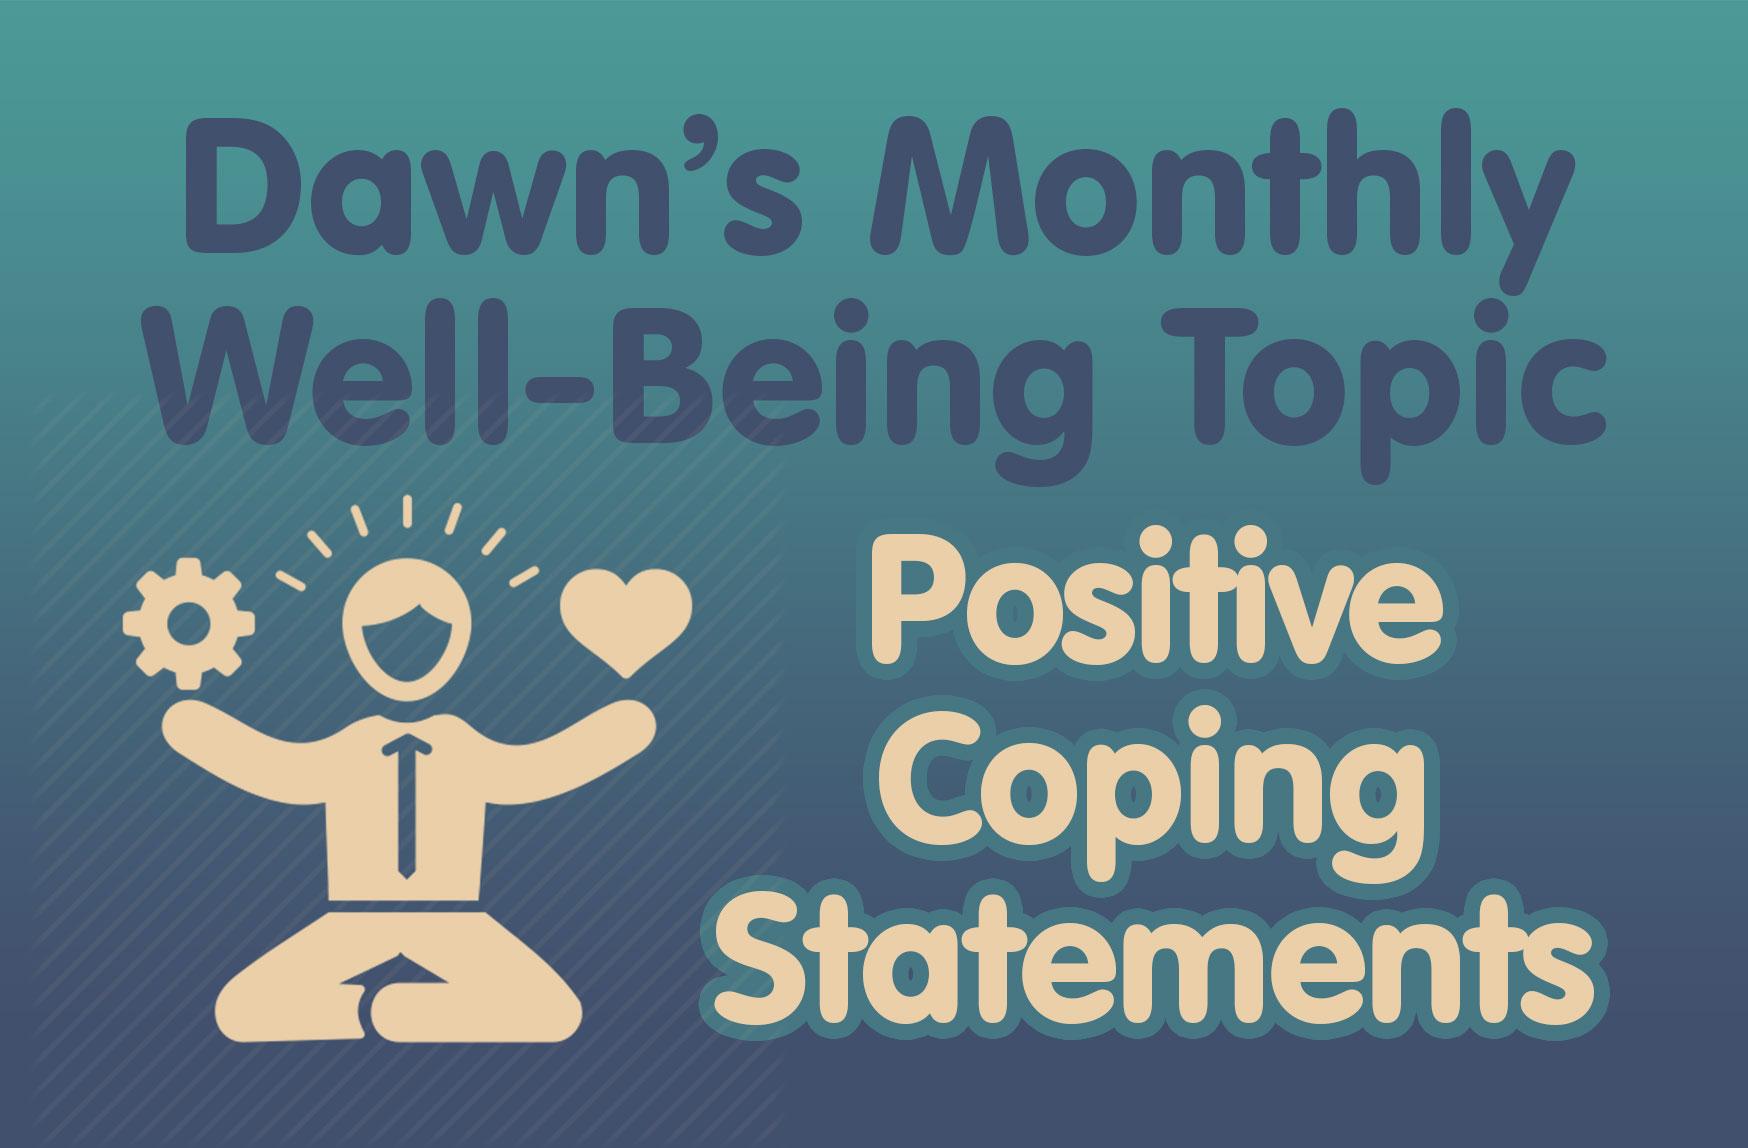 well-being topic positive coping statements